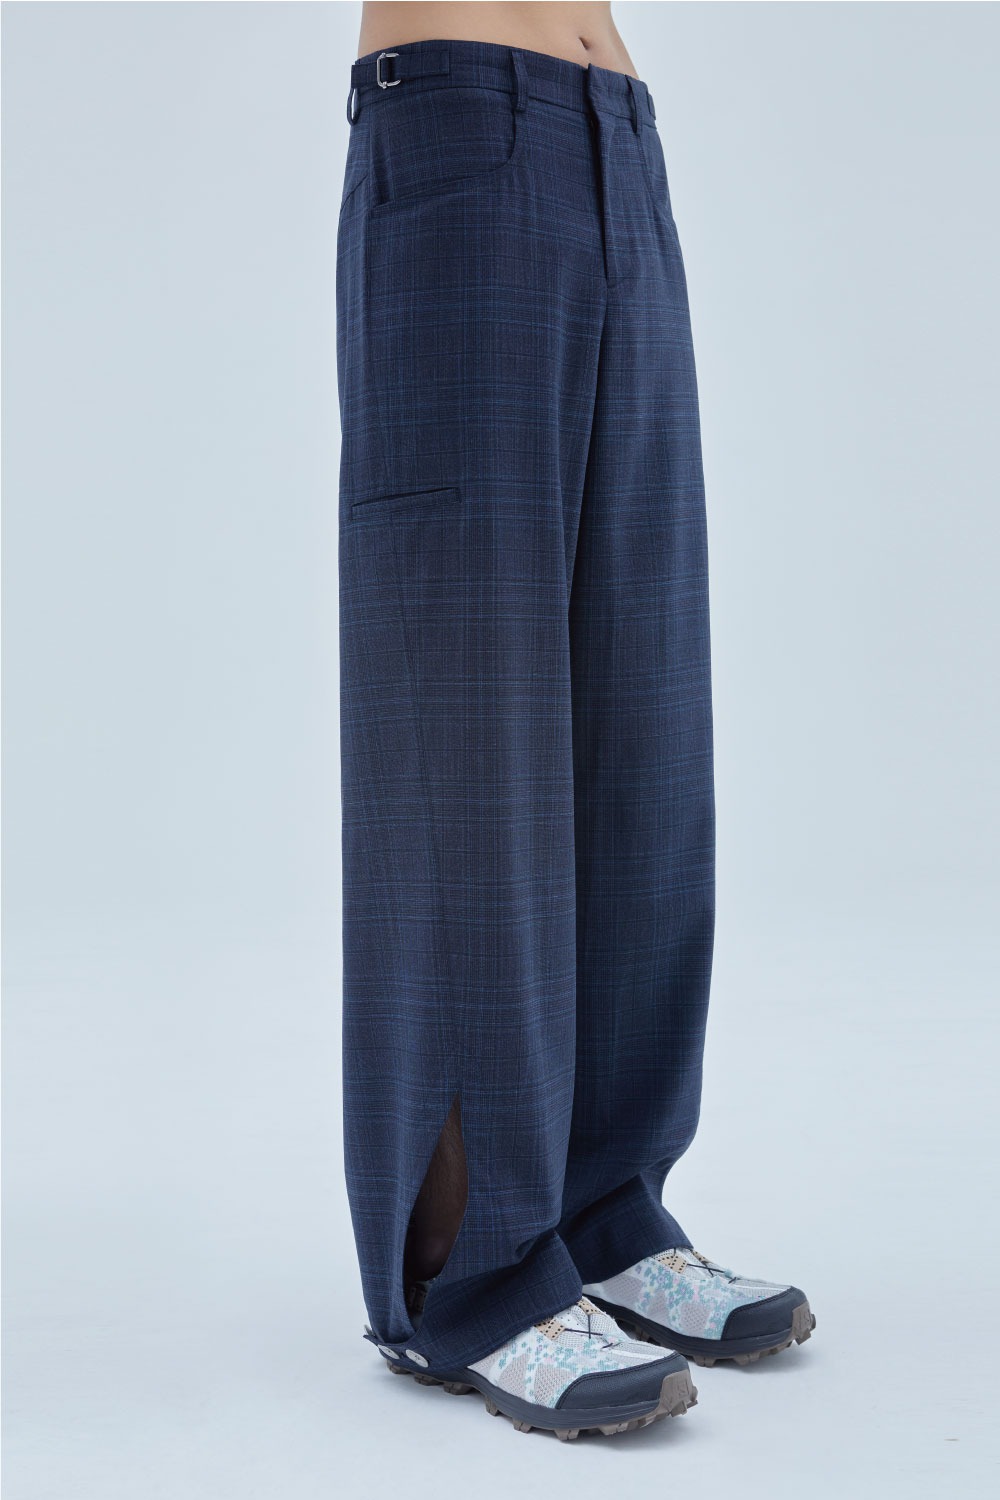 SAPPHIRE TROUSERS (BLUE CHECK)